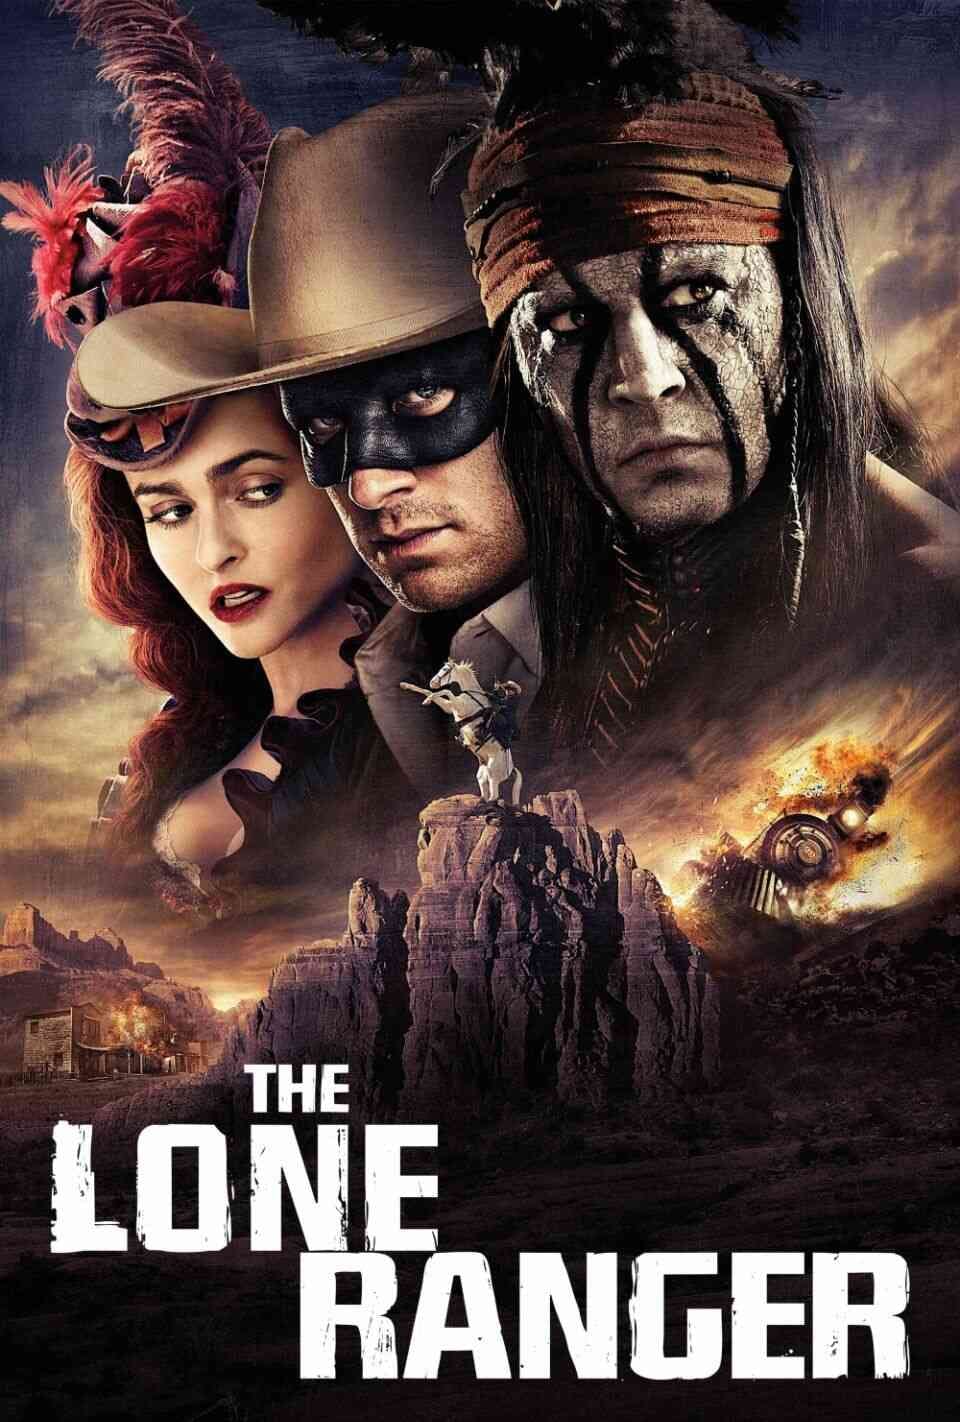 Read The Lone Ranger screenplay (poster)